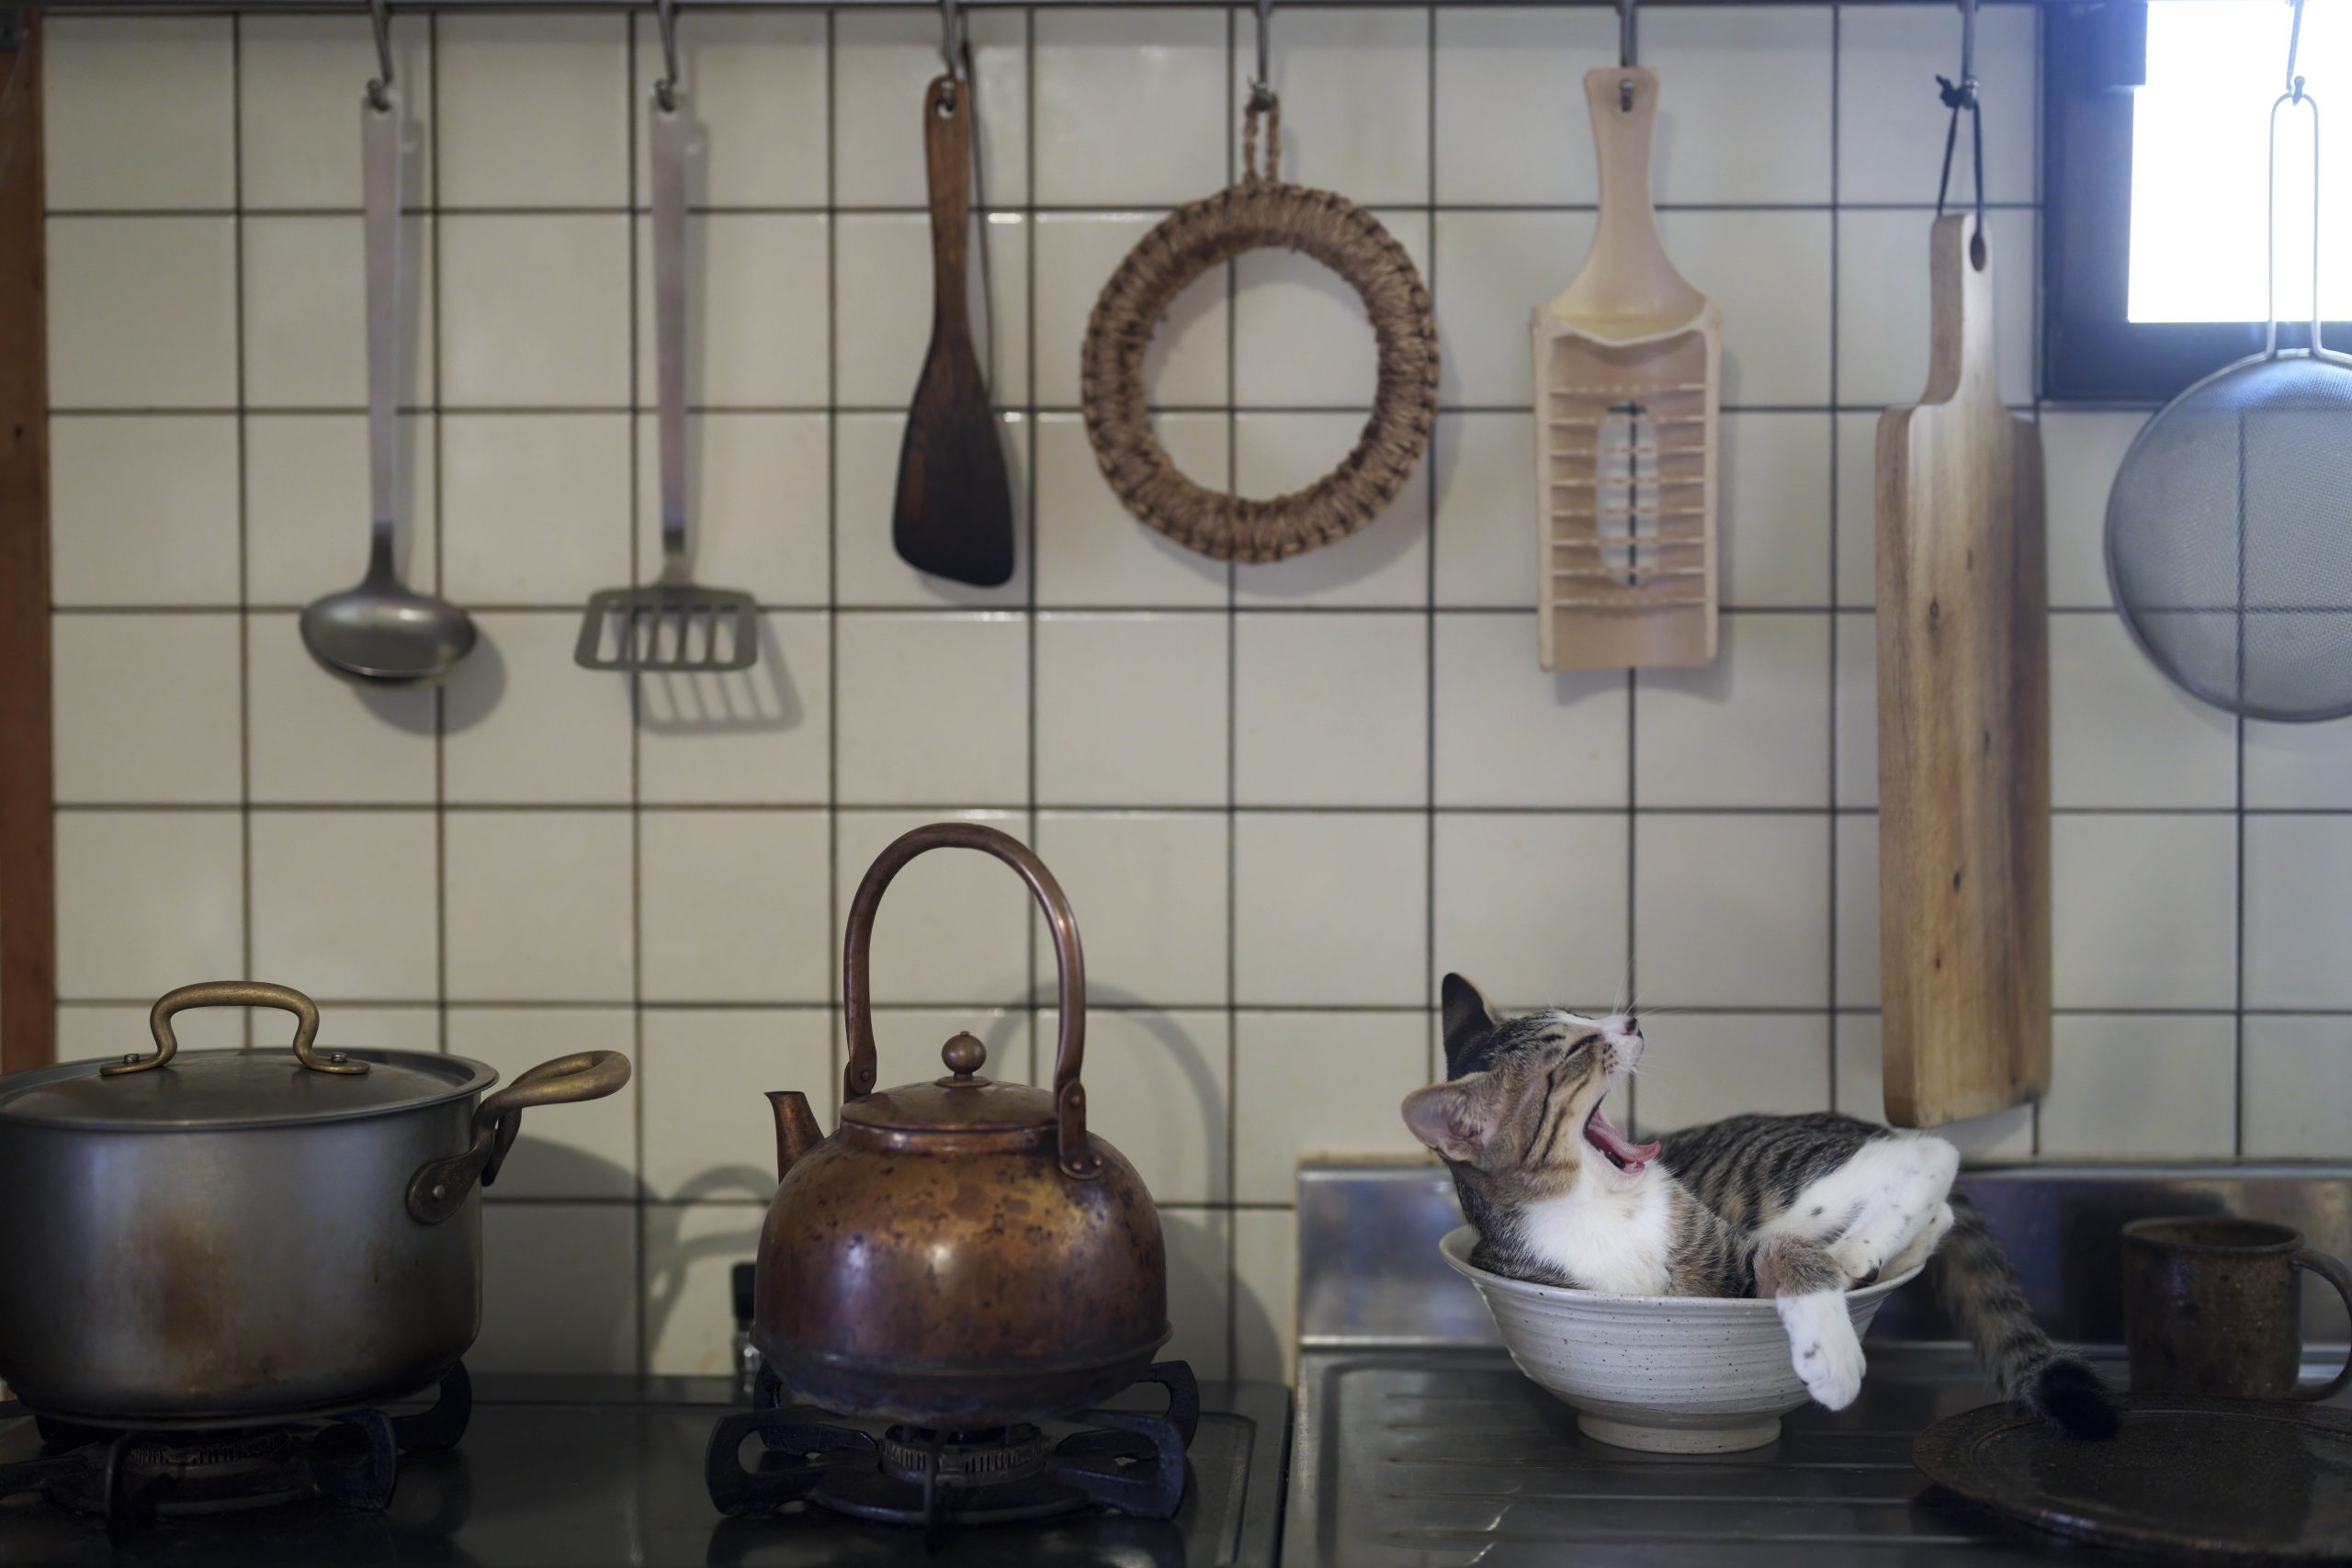 The Comedy Pet Photography Awards 2024 Atsuyuki Ohshima Kameoka Japan Title: Kitty in the kitchen Description: He stayed at there as if one of a kitchen tool. Animal: Cat Location of shot: Japan